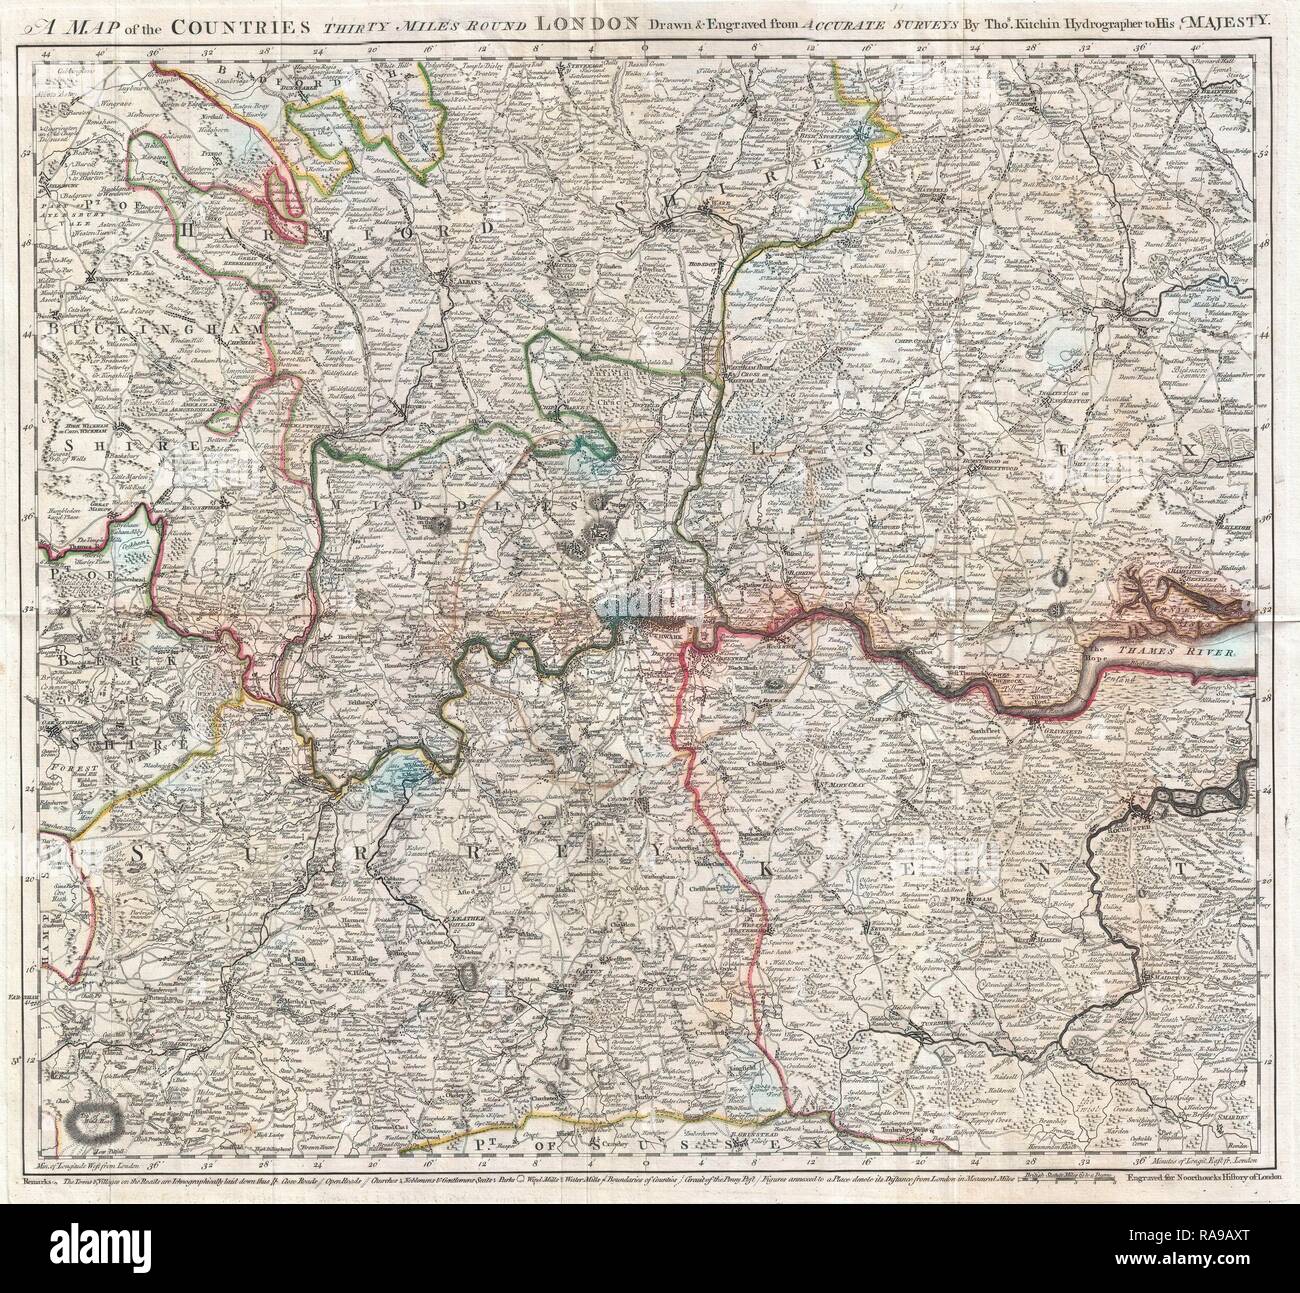 1773, Kitchin Map of the Country 30 Miles around London, England. Reimagined by Gibon. Classic art with a modern reimagined Stock Photo